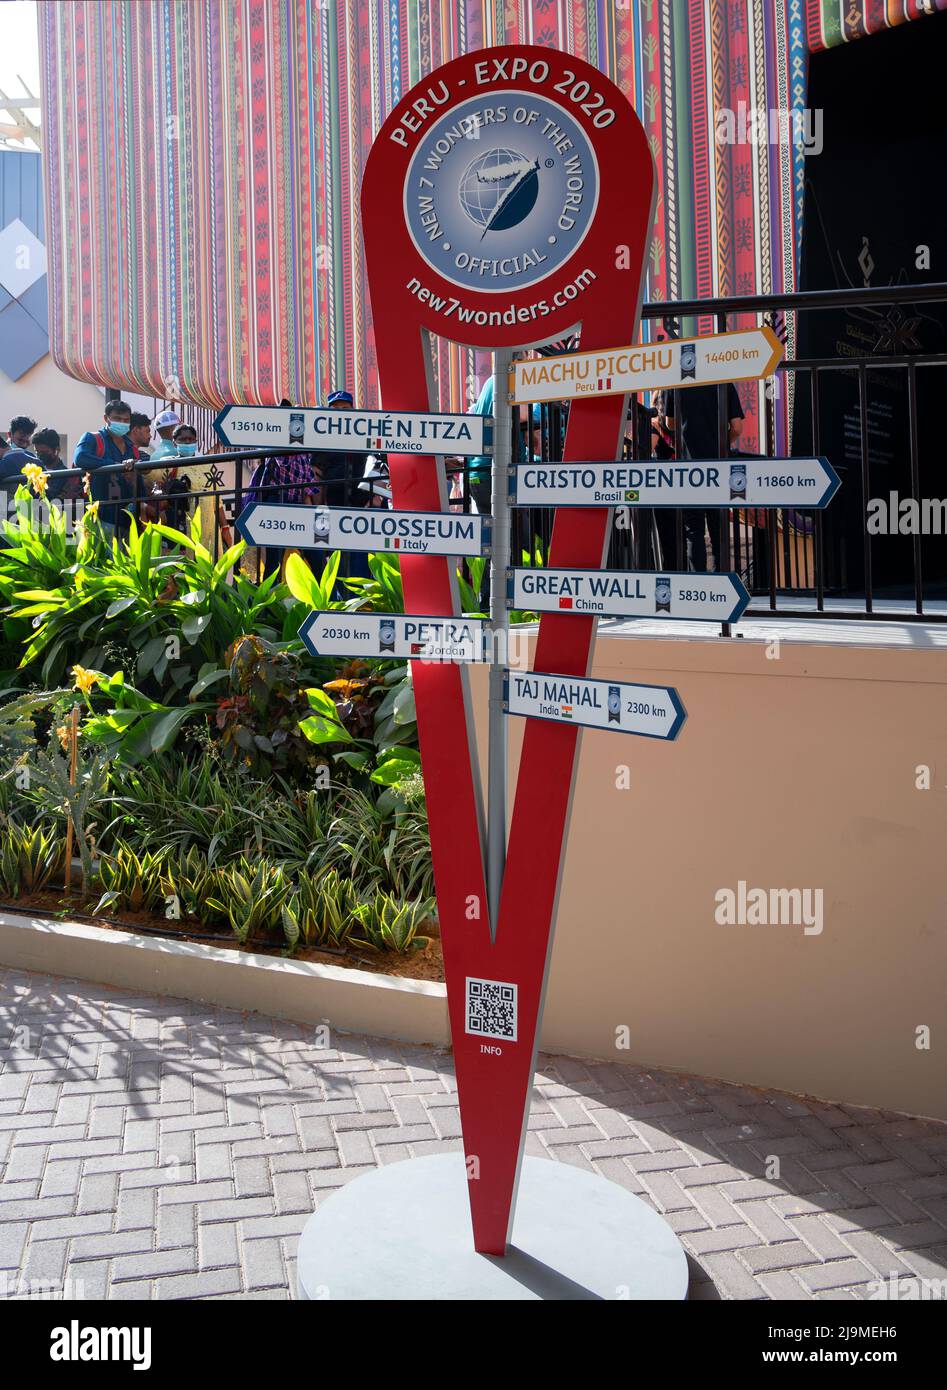 View of a signboard outside the Peru pavilion showcasing the new seven wonders of the world, at the Expo 2020,Dubai, UAE Stock Photo